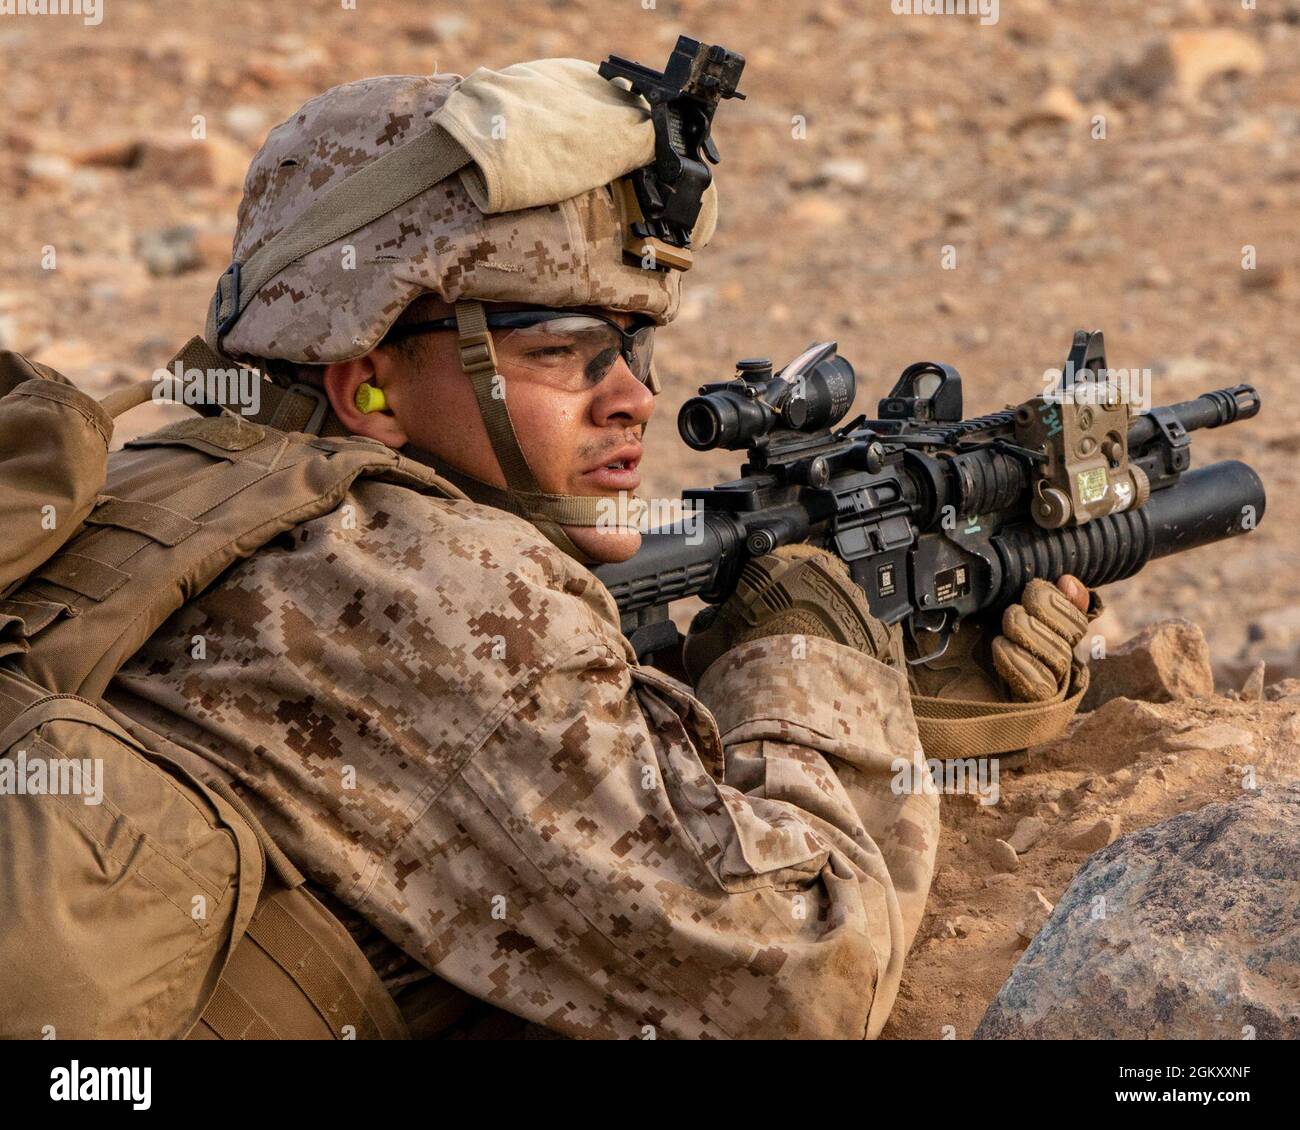 A U.S. Marine with India Company, 3rd Battalion, 25th Marines, 4th Marine Division, advances on a firing position on Range 410A during Integrated Training Exercise (ITX) 4-21 at Marine Corps Air Ground Combat Center, Twentynine Palms, California on July 22. Range 410A provides Reserve Marines the opportunity to execute a fire and maneuver attack supported by mortarmen, machine gunners and combat engineers. Stock Photo